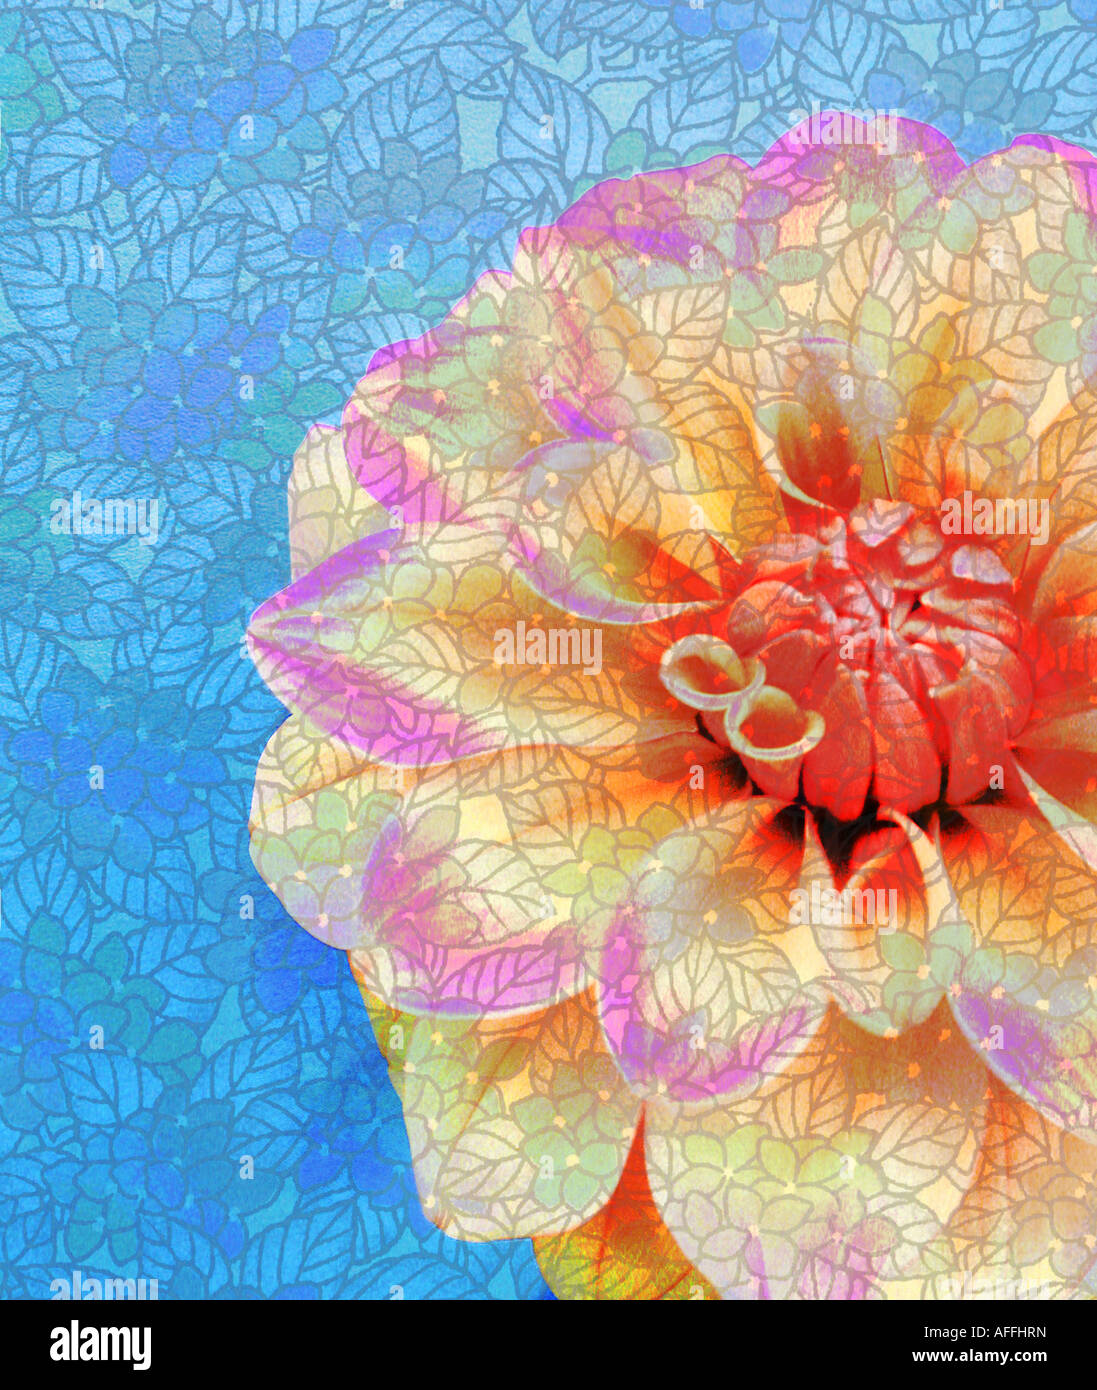 Illustration of a cream adn pink dahlia flower against a blue textured background Stock Photo